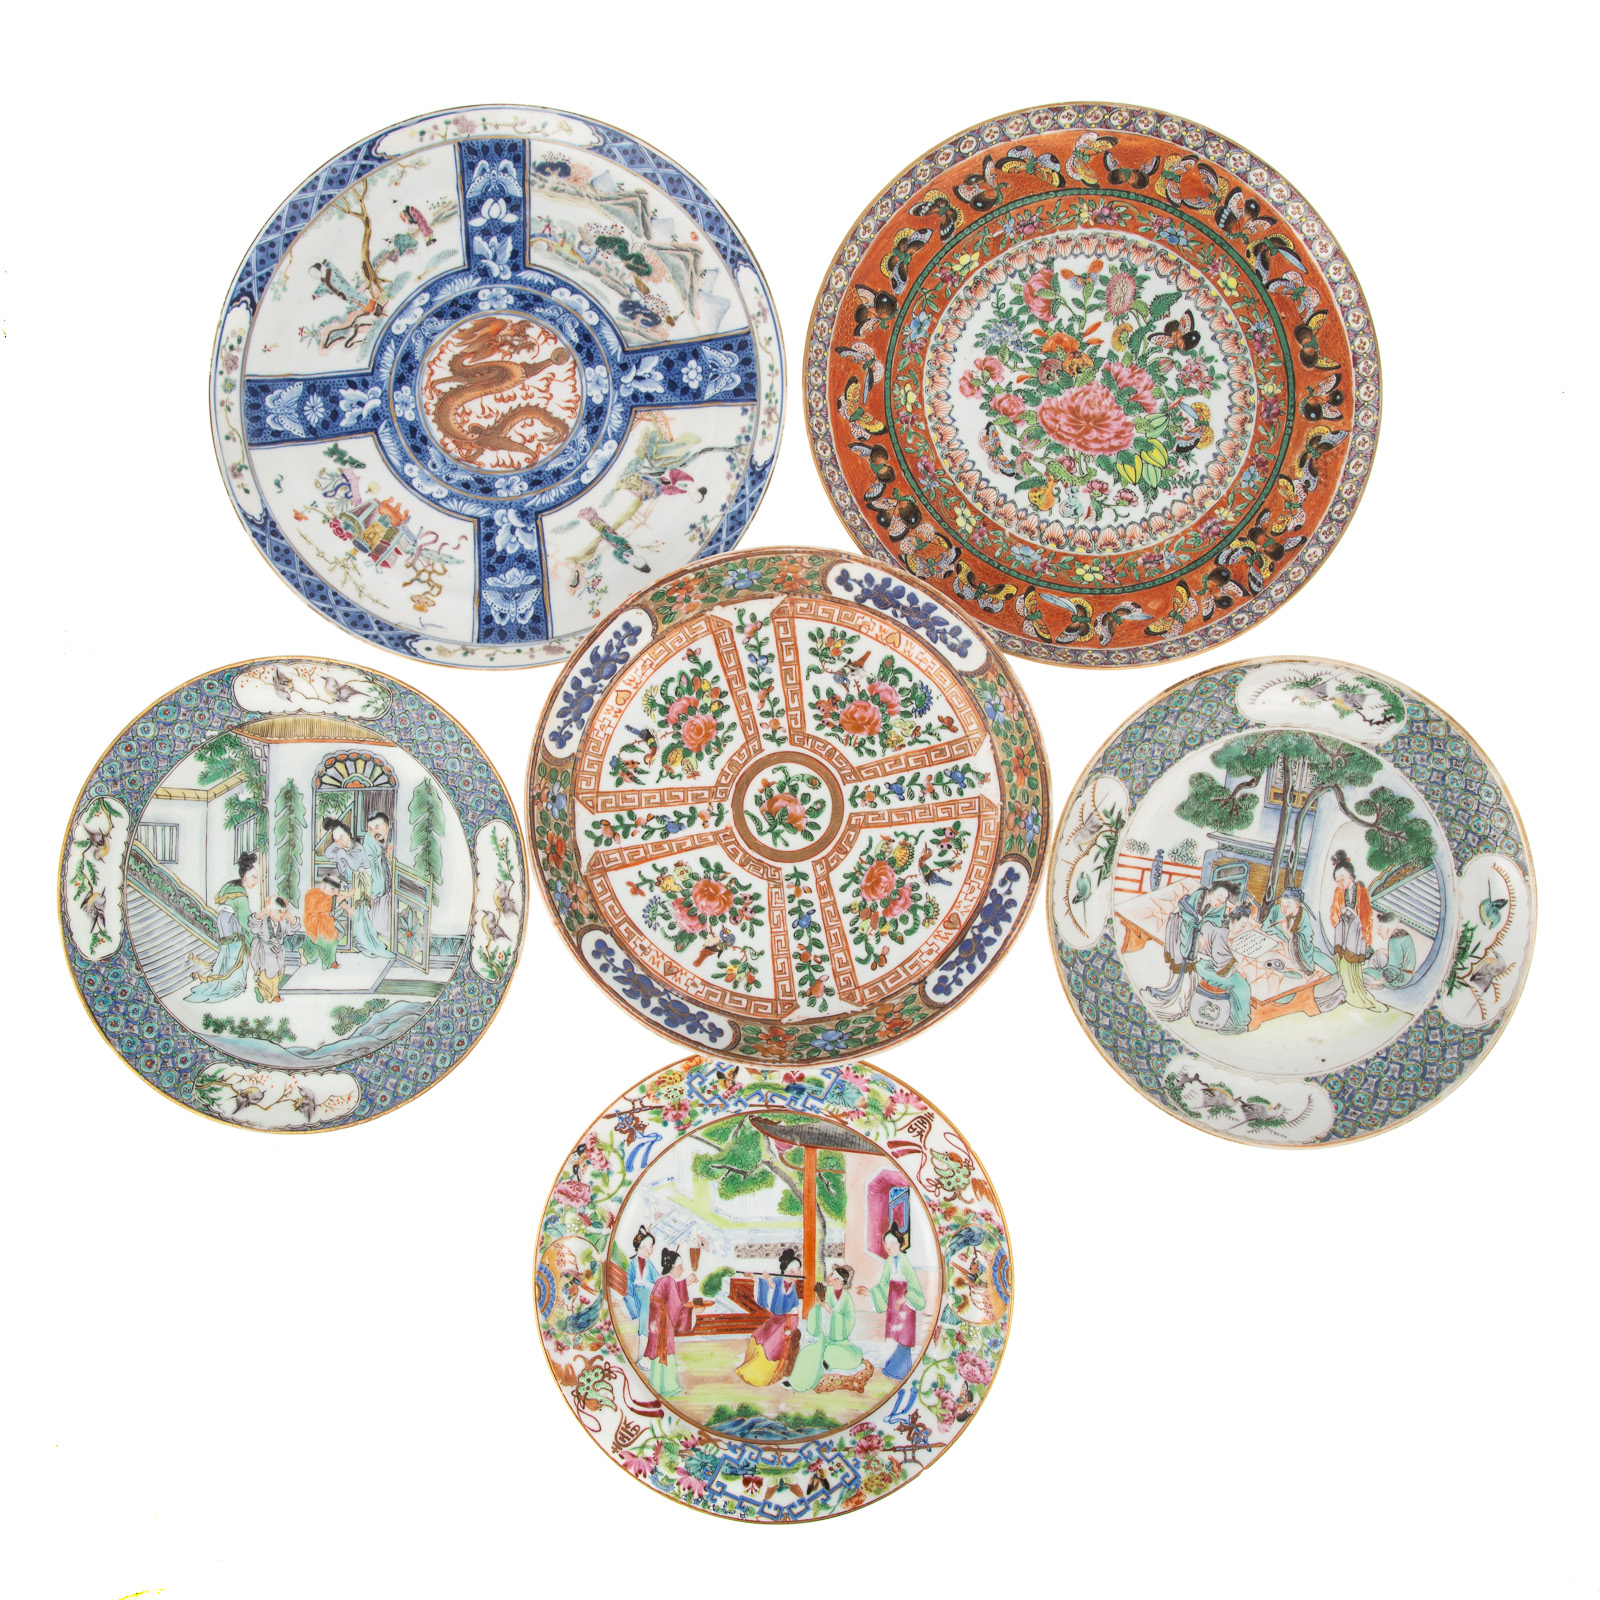 SIX CHINESE EXPORT PLATES Daoguang through